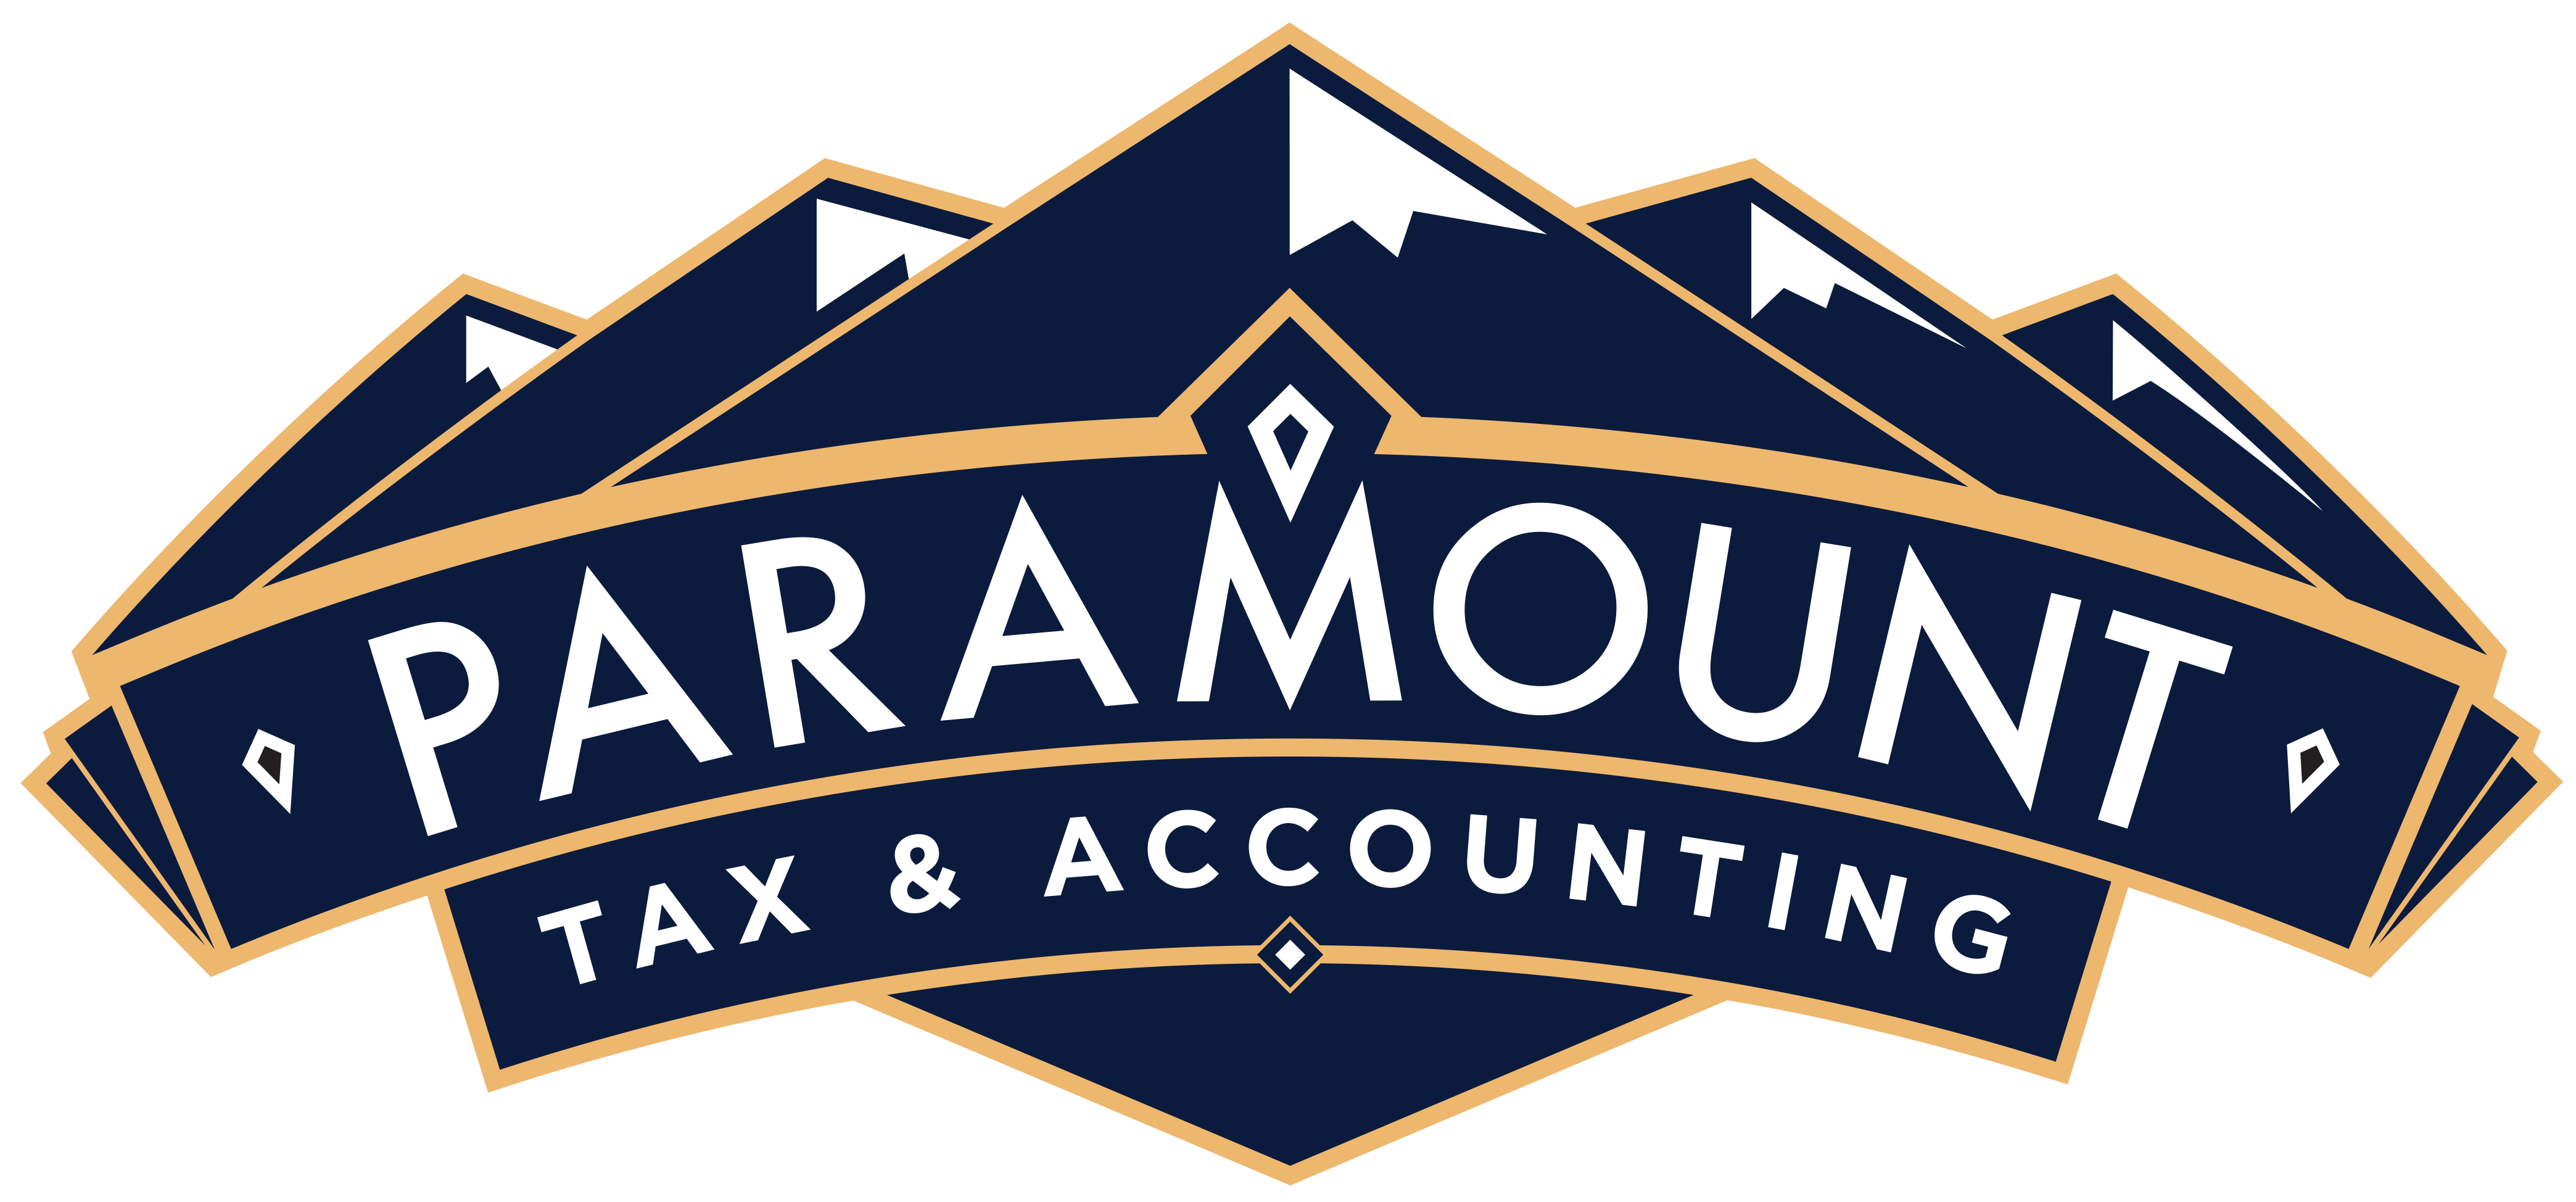 Review Paramount Tax & Accounting in Las Vegas